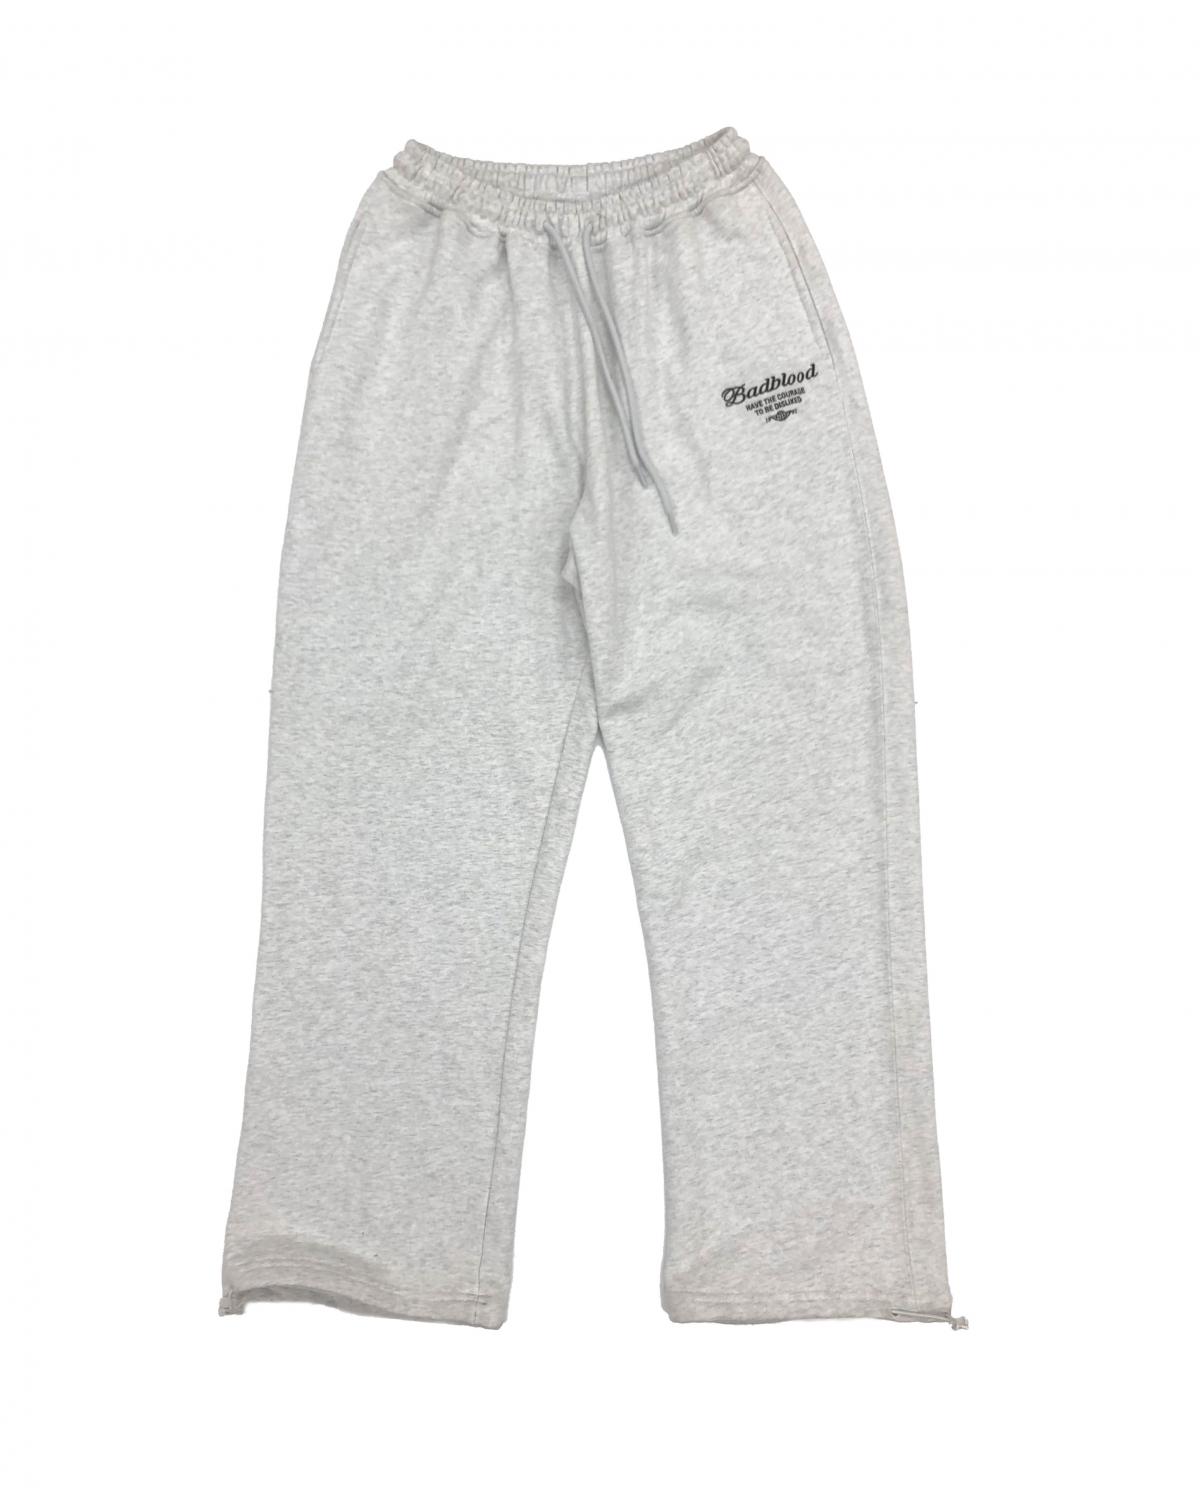 Unisex's French Terry Sweatpants JS0008 #0